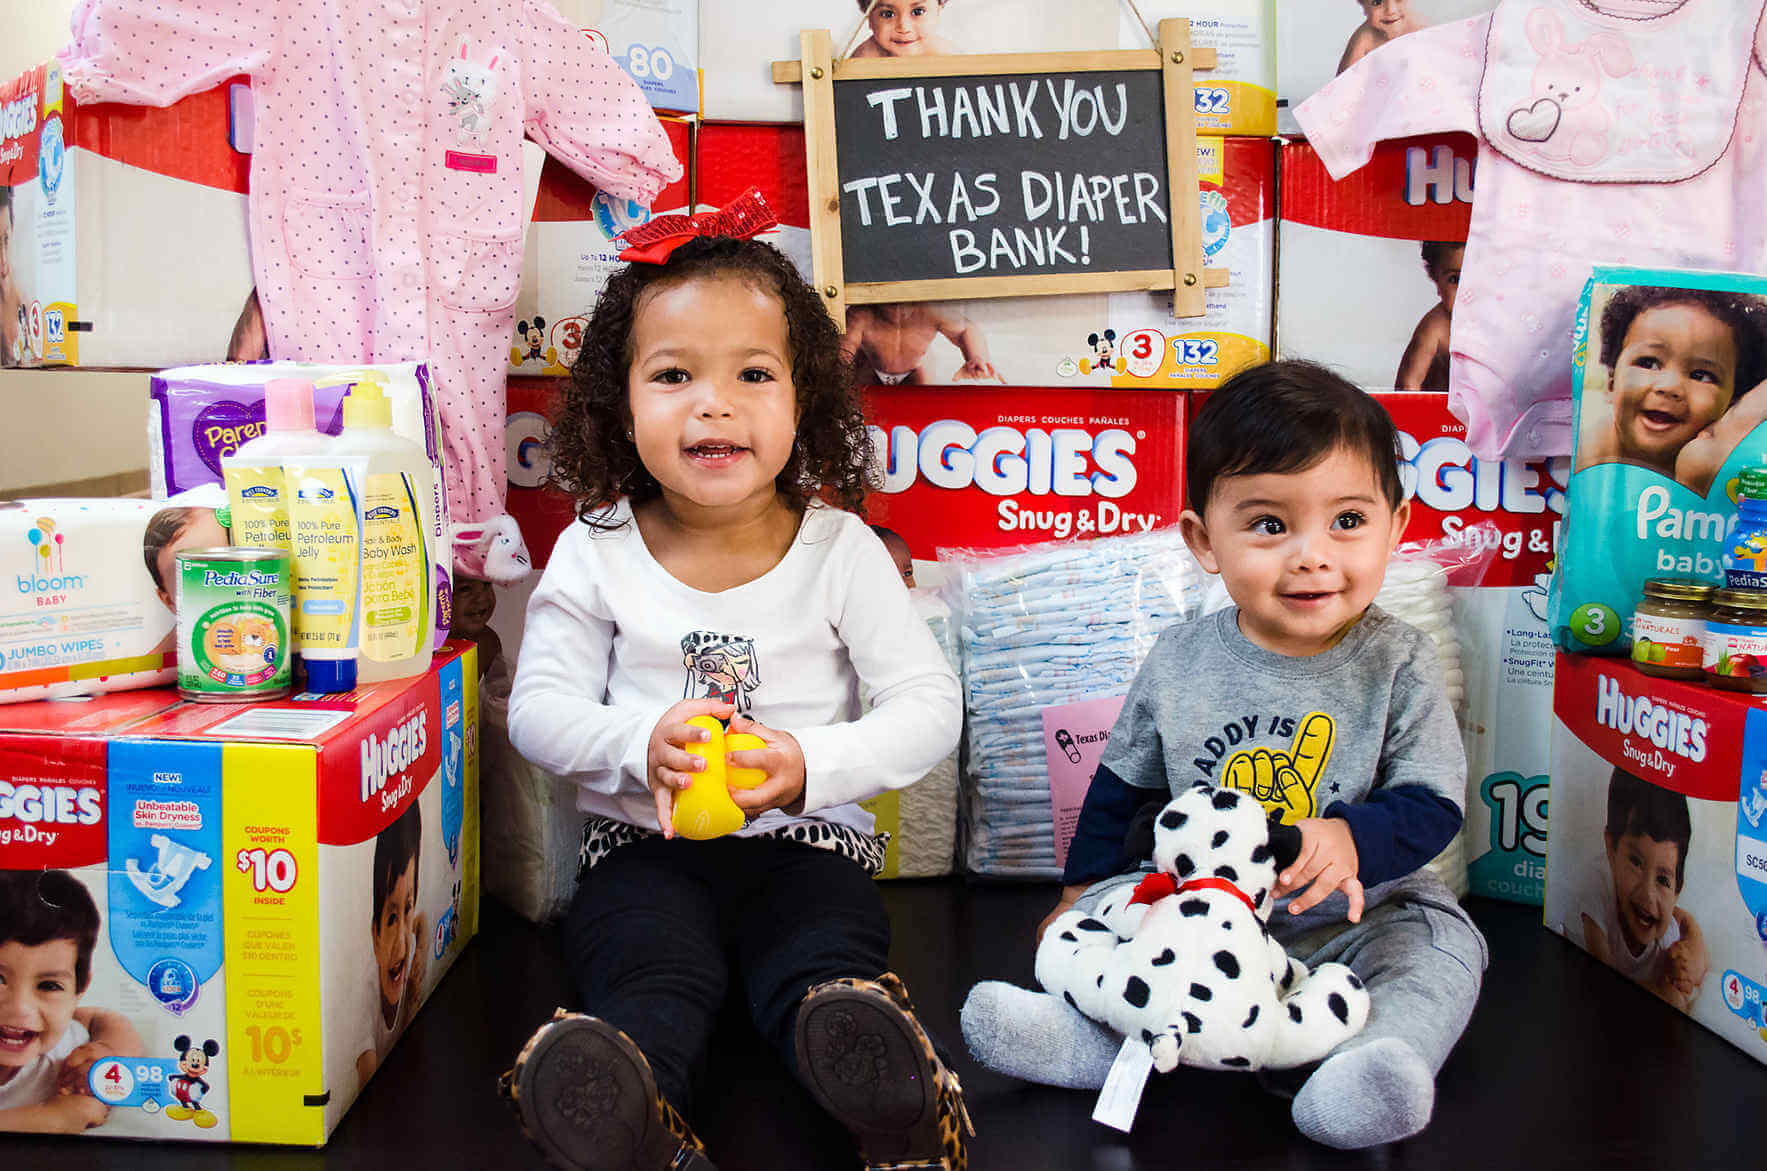 Texas Diaper Bank Drives Donor Engagement